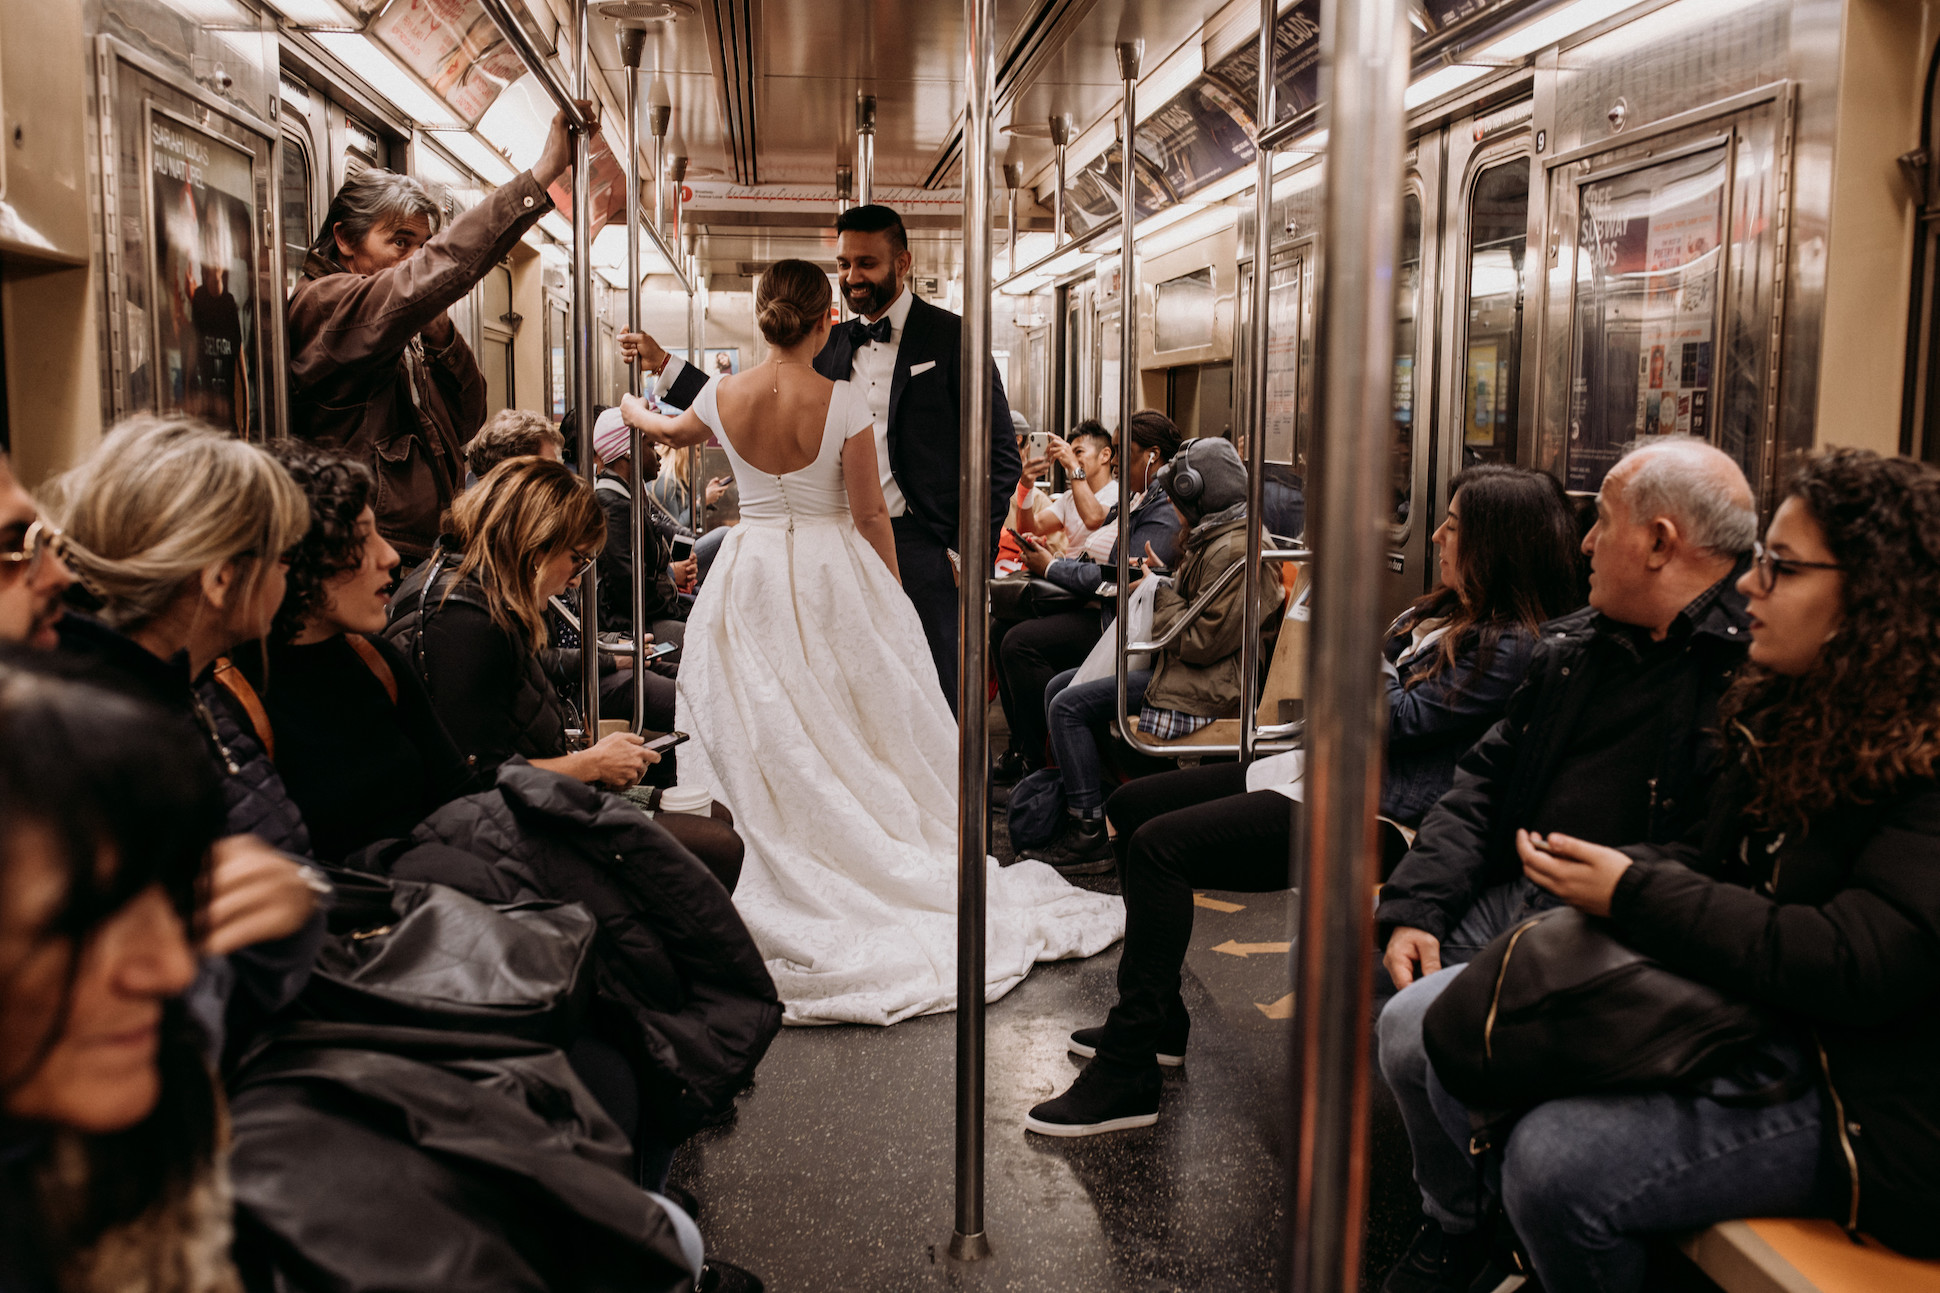 Bride and groom in crowded subway